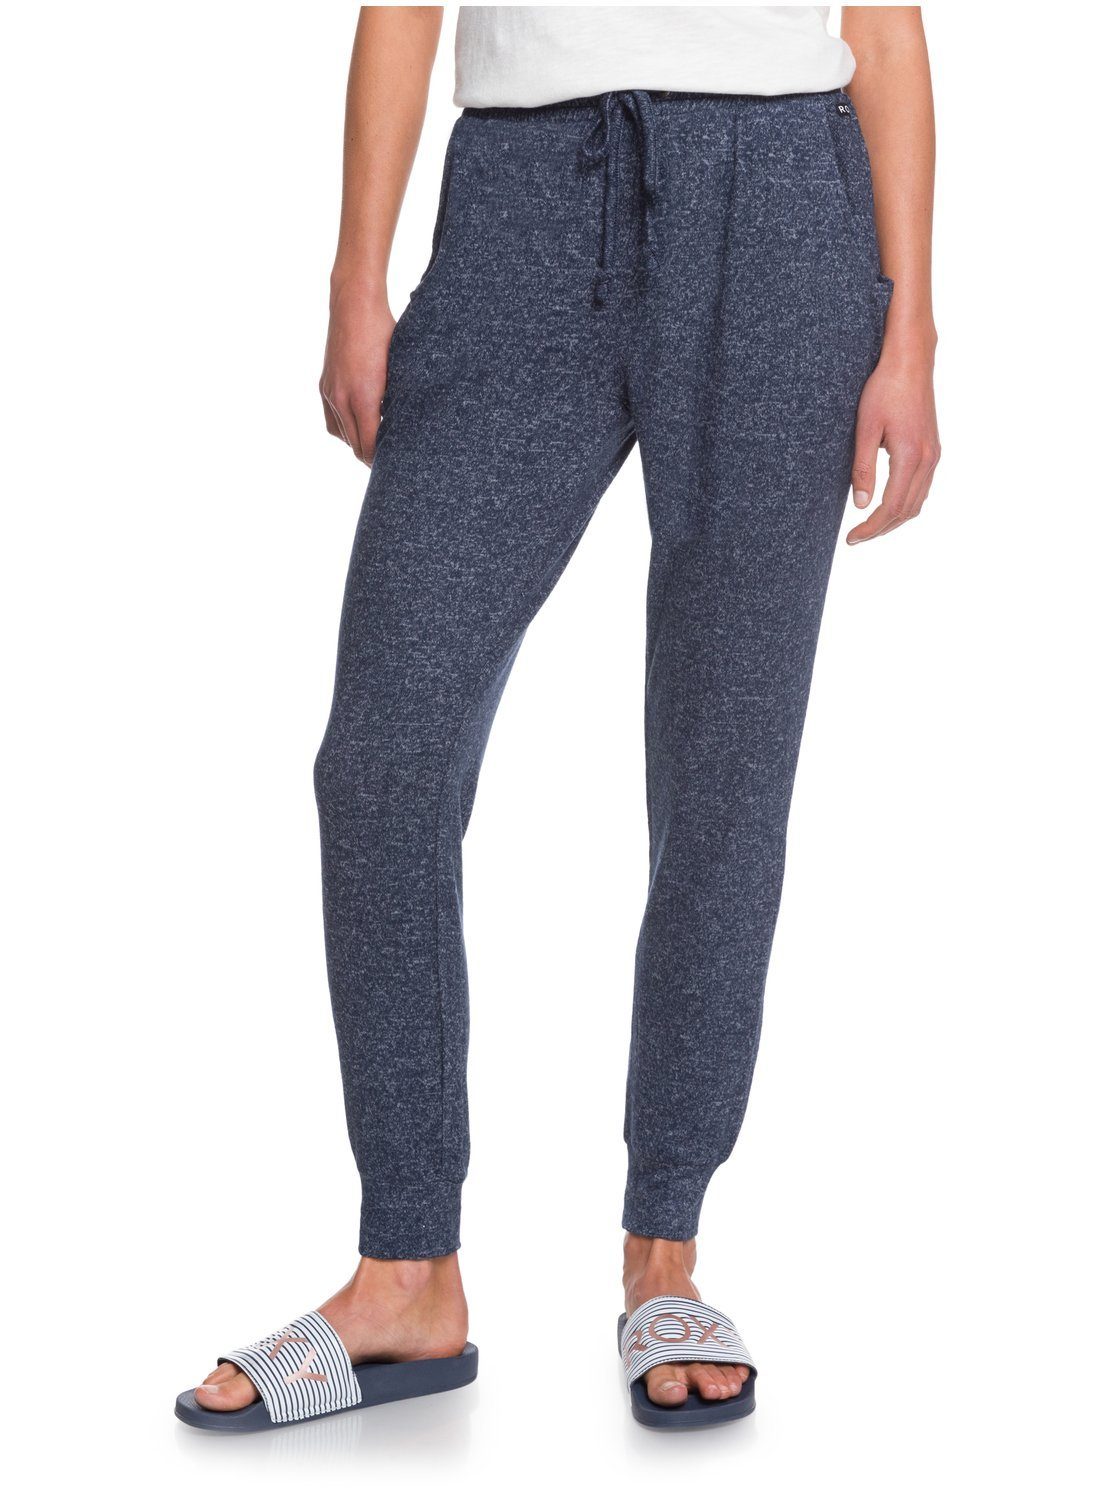 Roxy Jogger Pants Just Yesterday Stoff Leichtes Weiches 